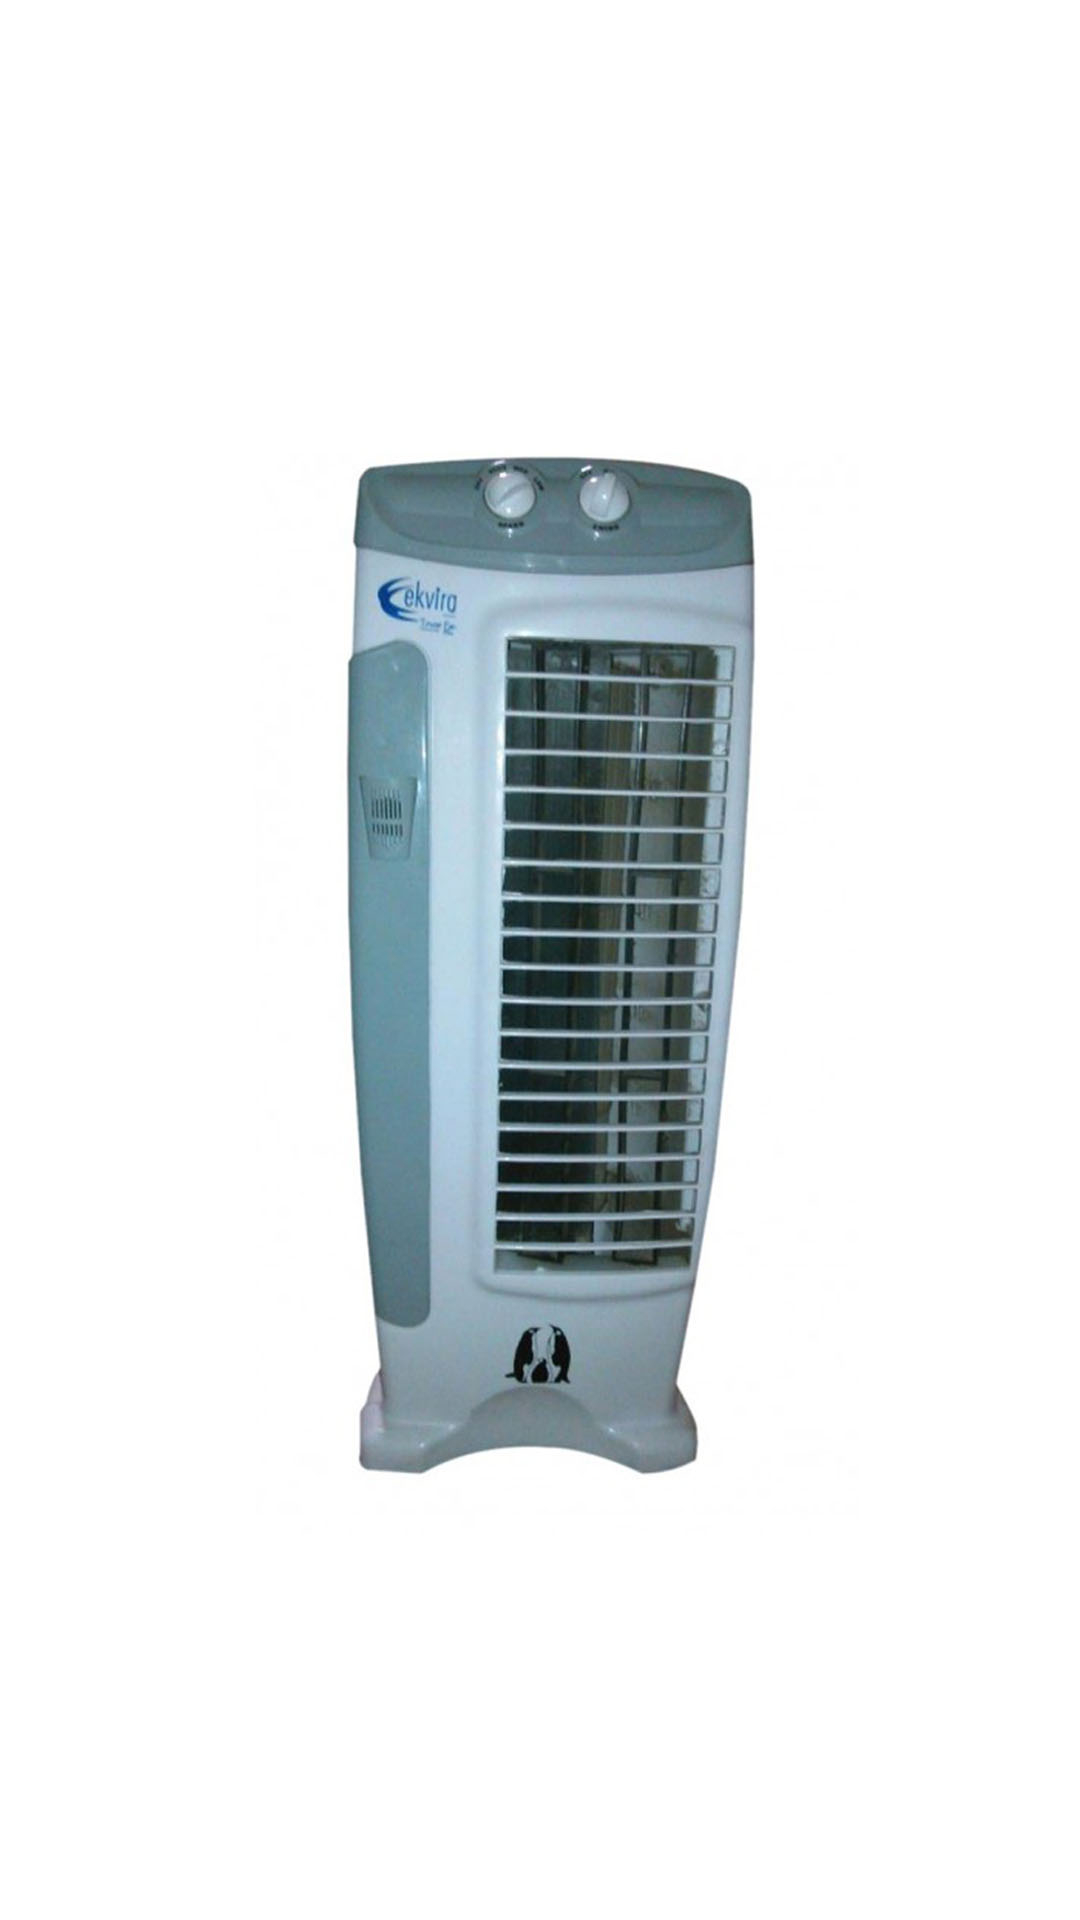 Ekvira Fans Air Coolers Prices In India Mon Jul 08 2019 with proportions 1080 X 1920